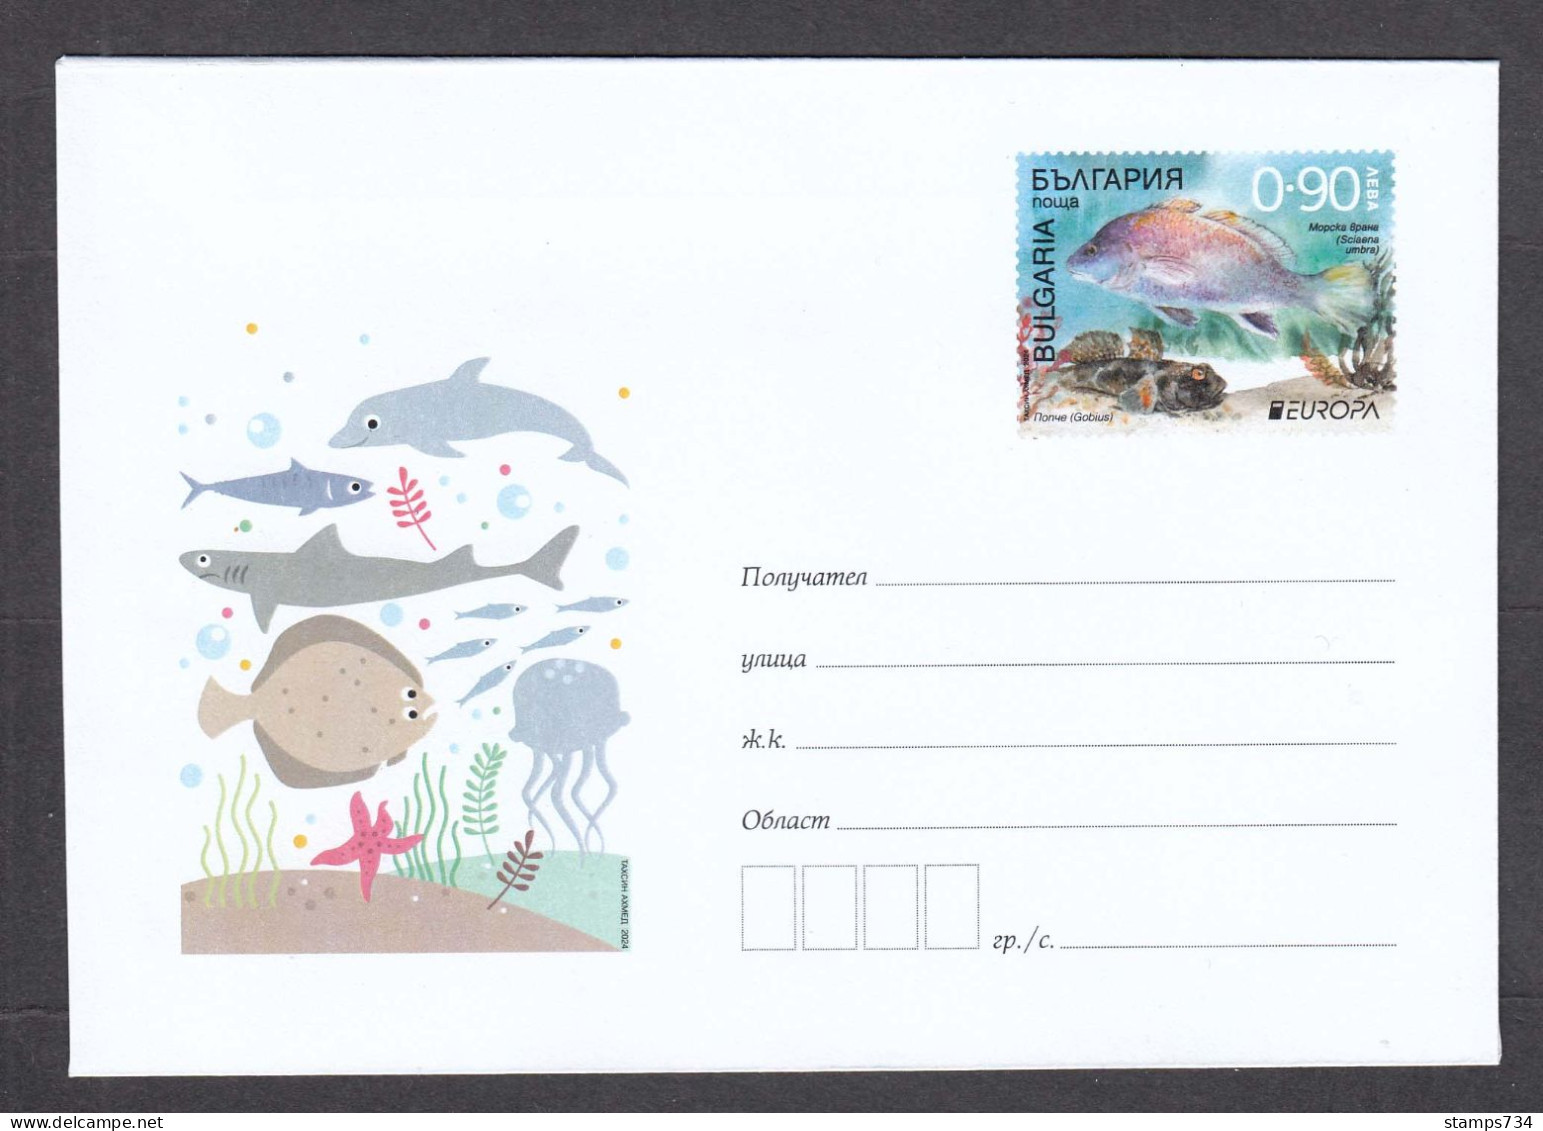 Bulgaria 2024 - EUROPA: Underwater Fauna And Flora, Post. Stationery, Mint - Enveloppes